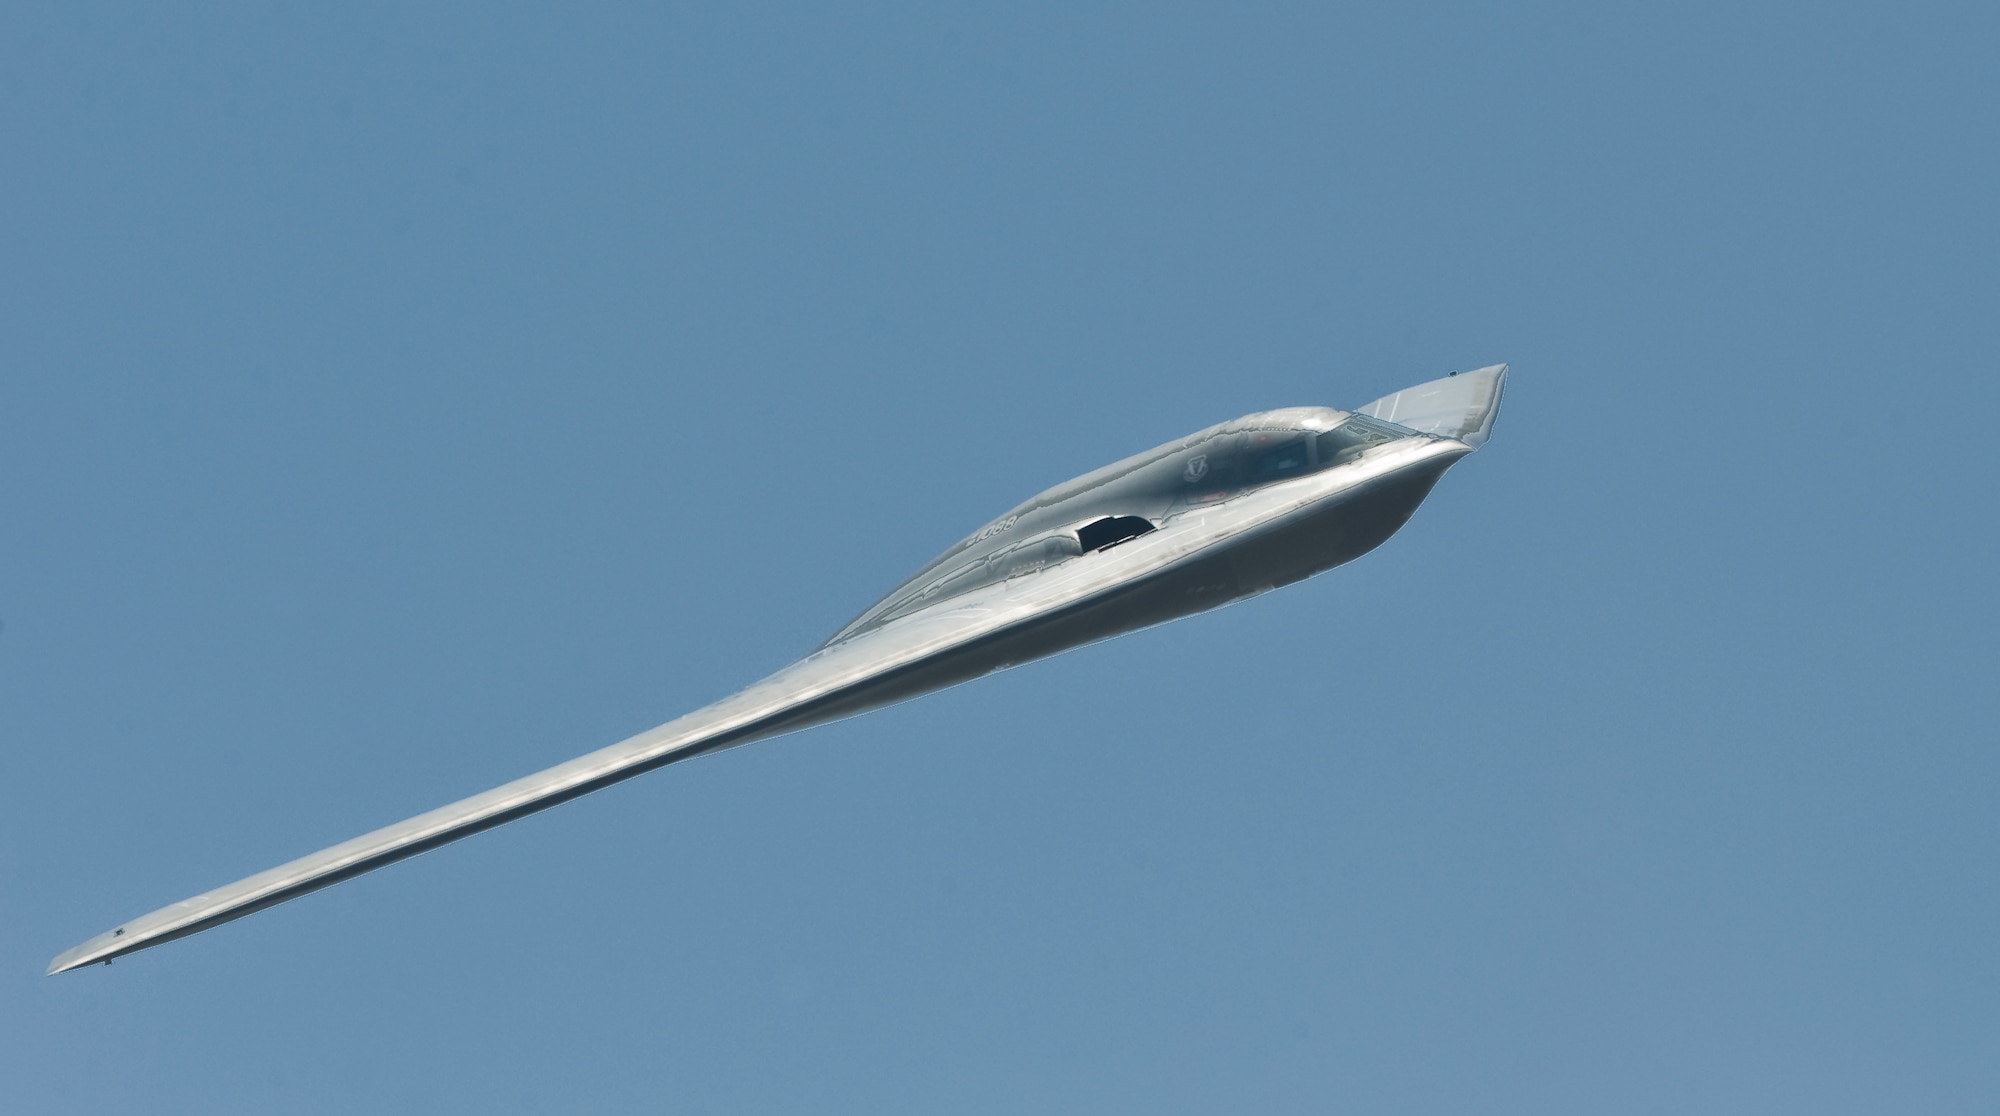 A B-2 Sprit flies over Dyess during the Dyess big Country Airfest April 28, 2012, at Dyess Air Force Base, Texas. A B-2 has a payload of 40,000 pounds and can reach high-subsonic speeds. (U.S. Air Force photo by Airman 1st Class Jonathan Stefanko/ Released)